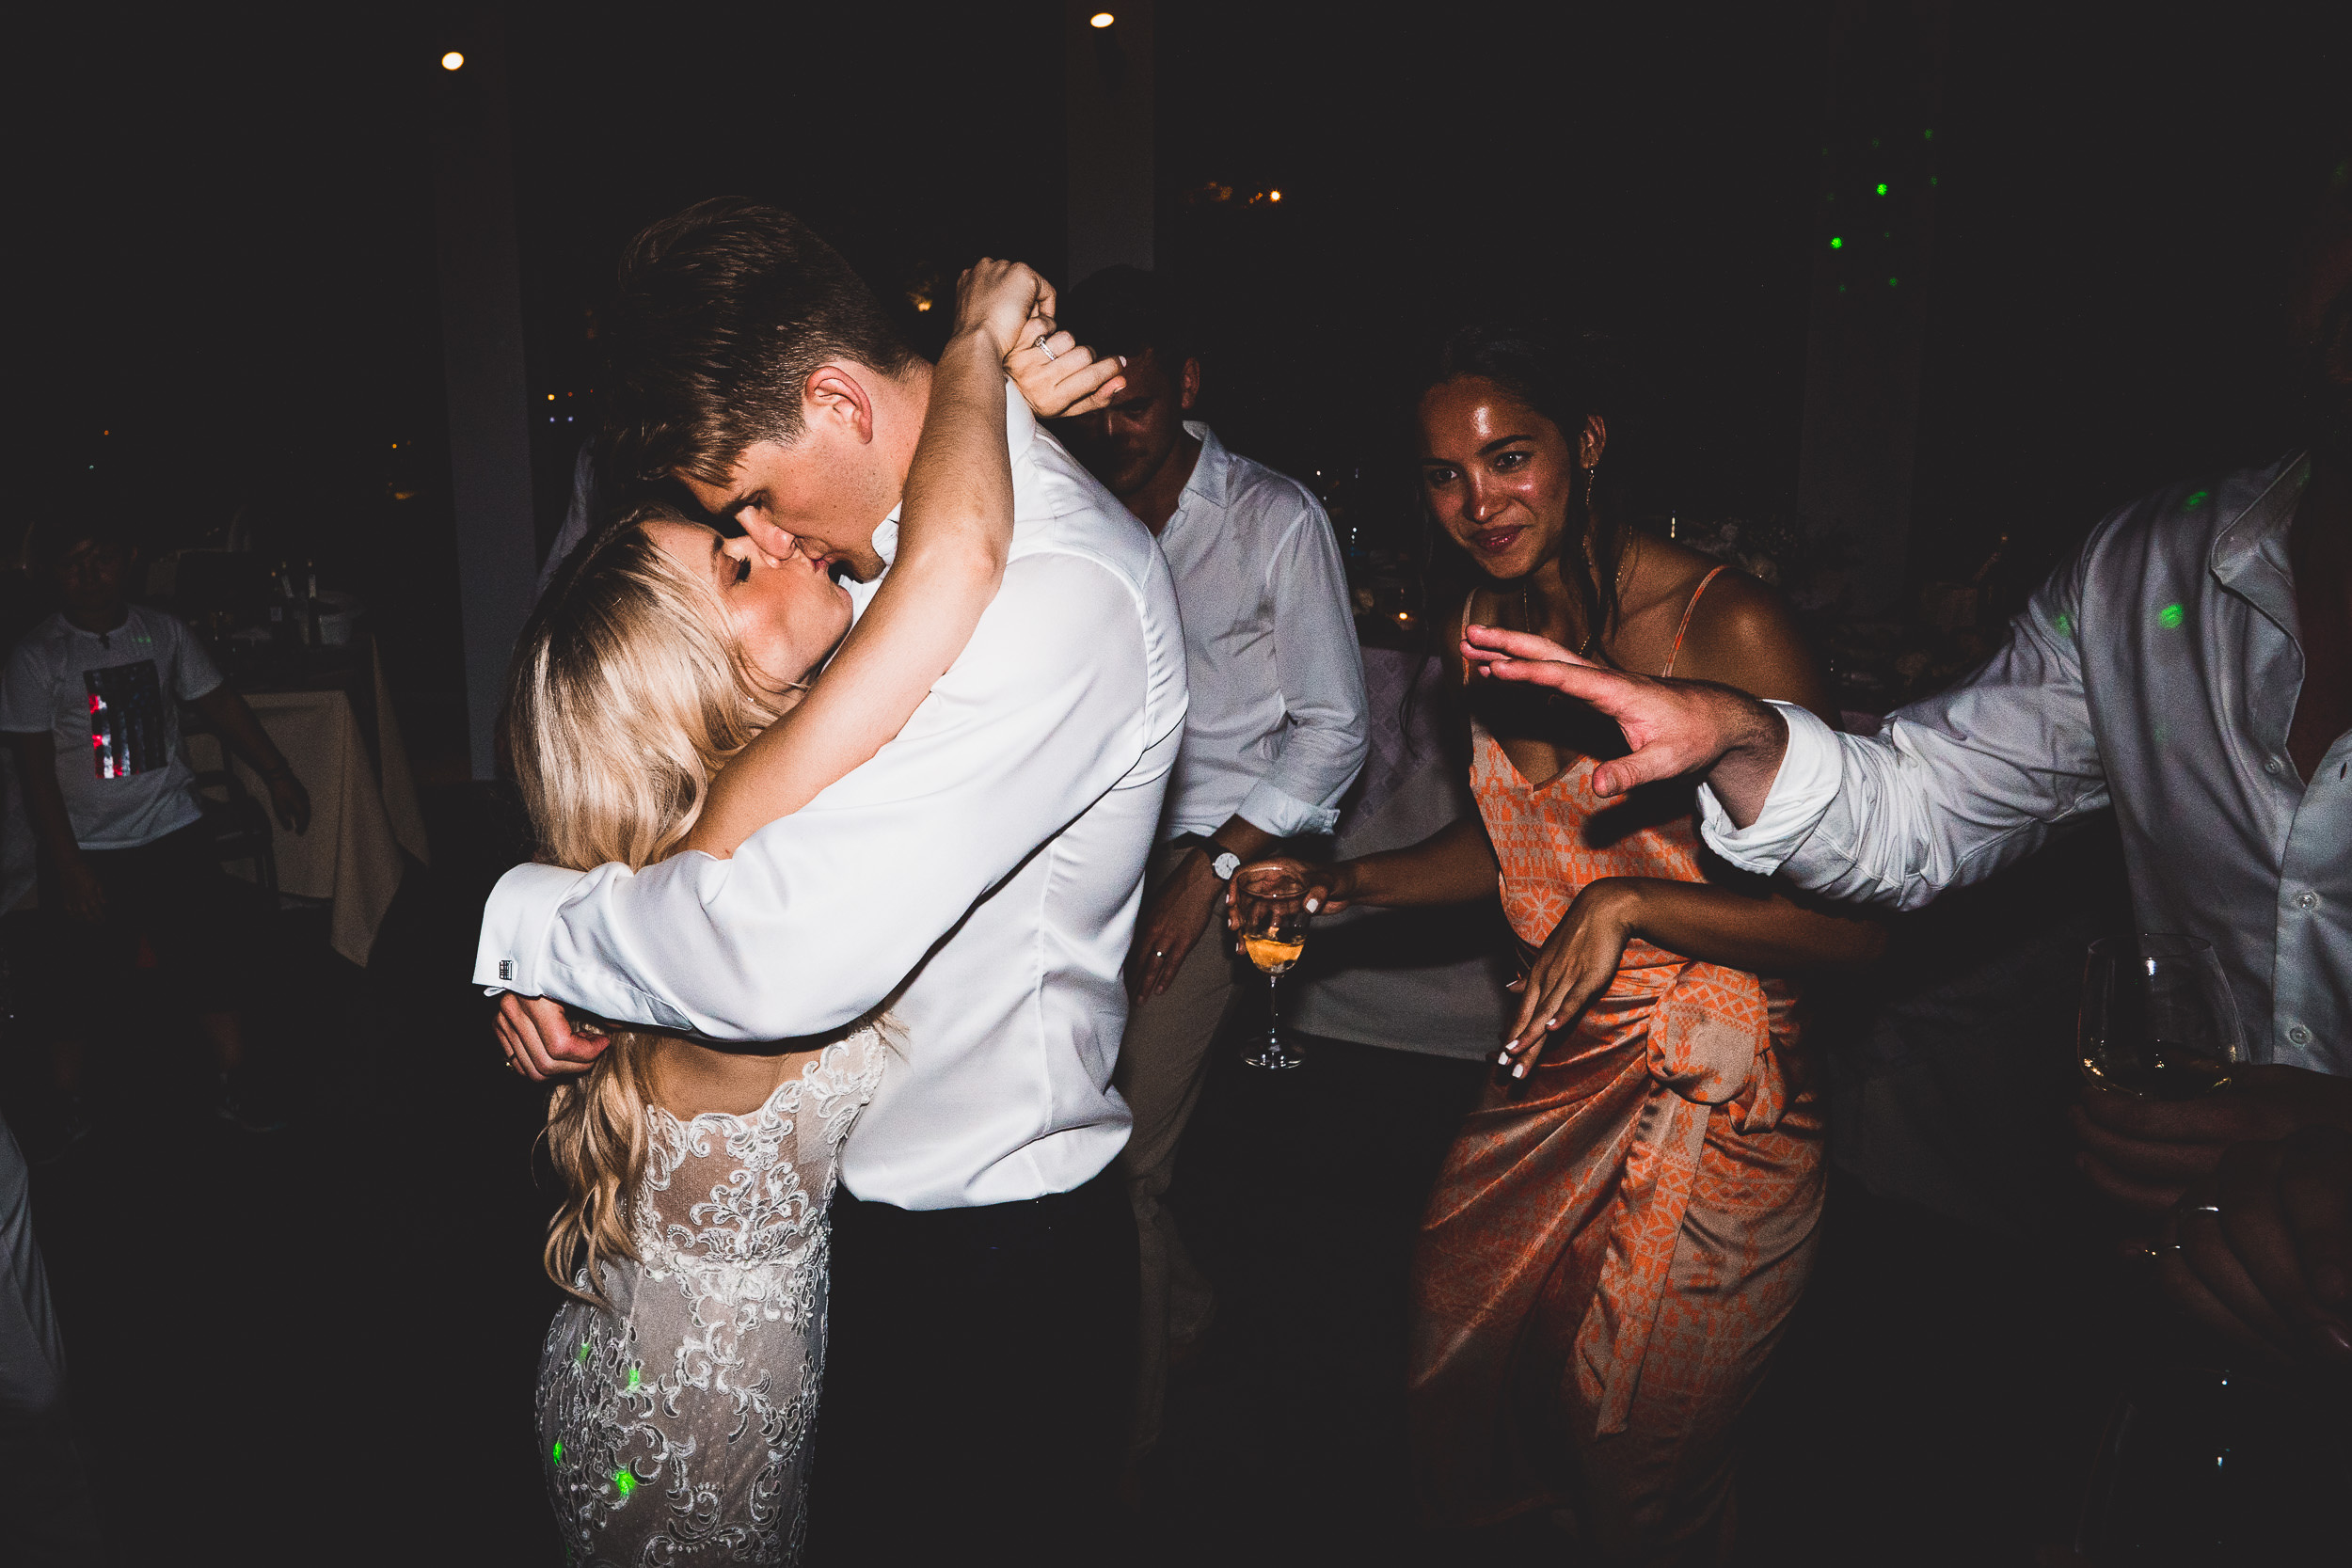 A wedding photographer captures a bride and groom sharing a kiss on the dance floor.